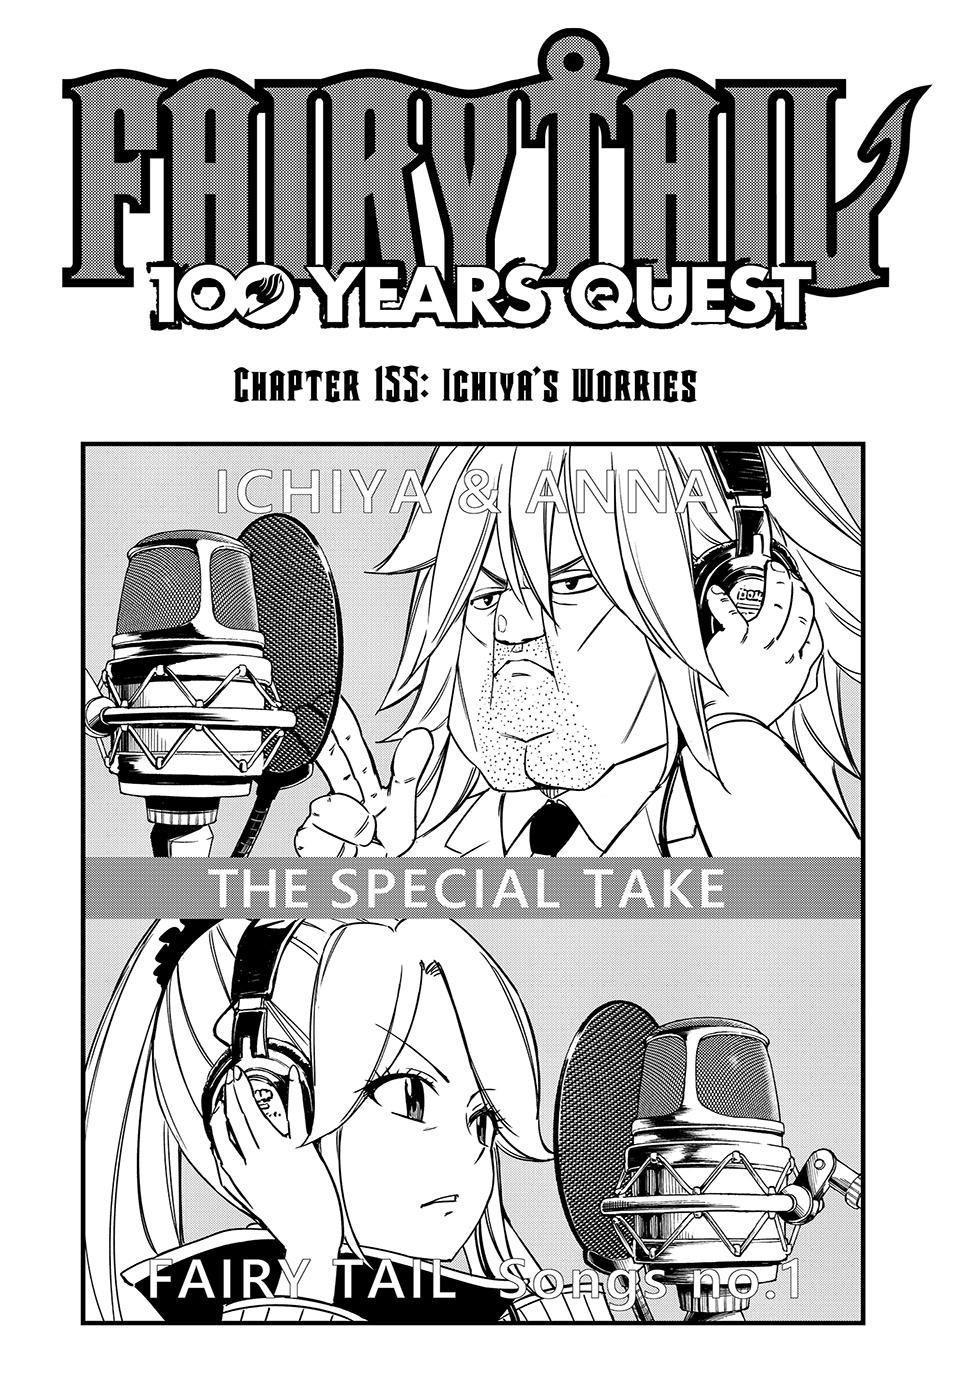 Fairy Tail: 100 Years Quest Chapter 155